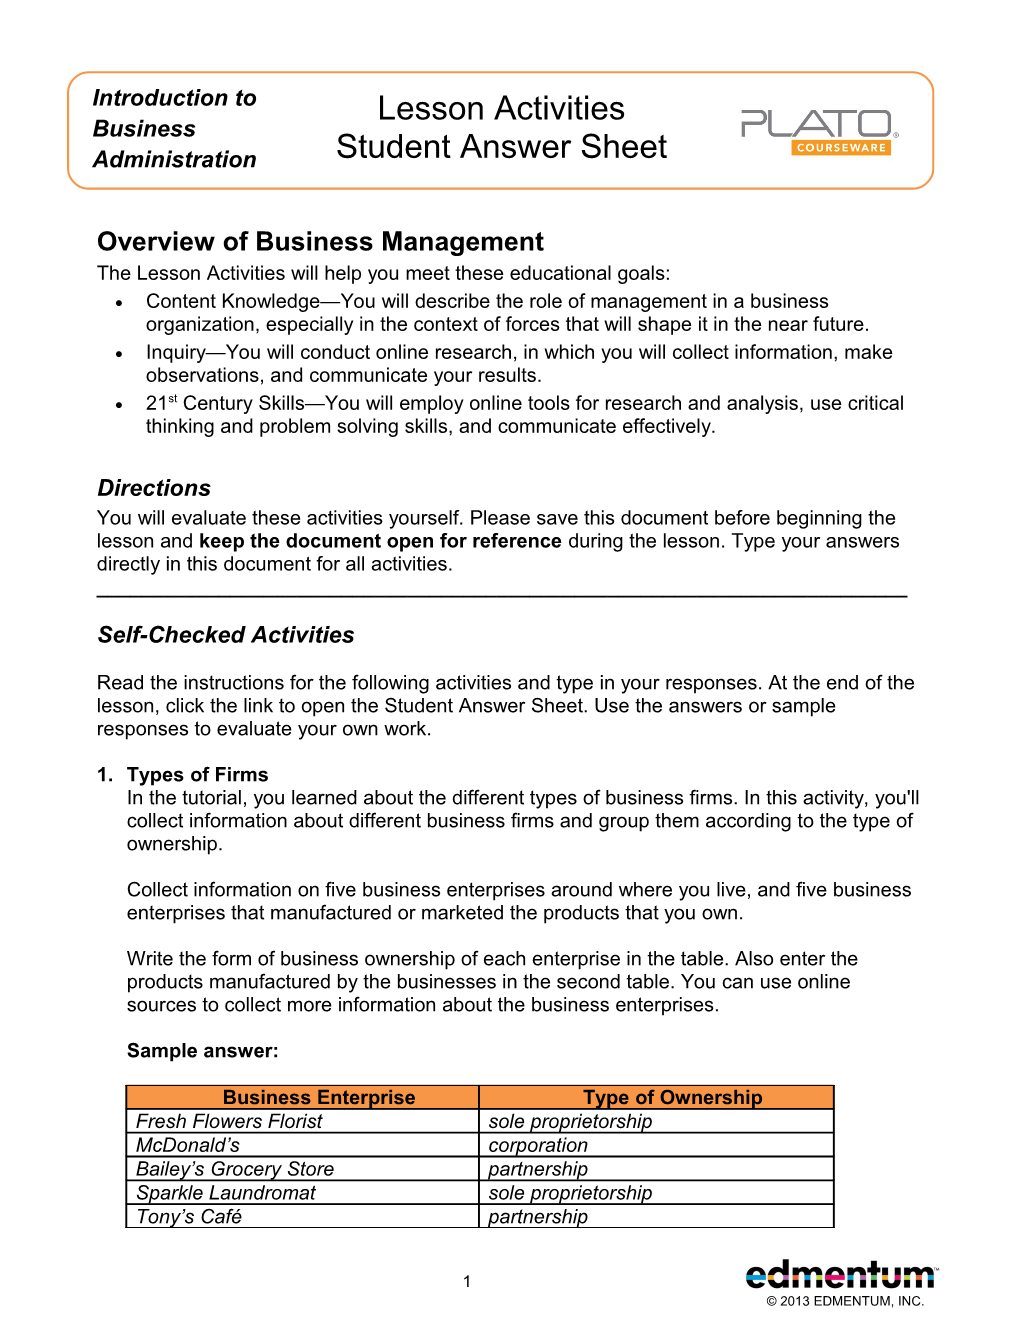 Overview Of Business Management